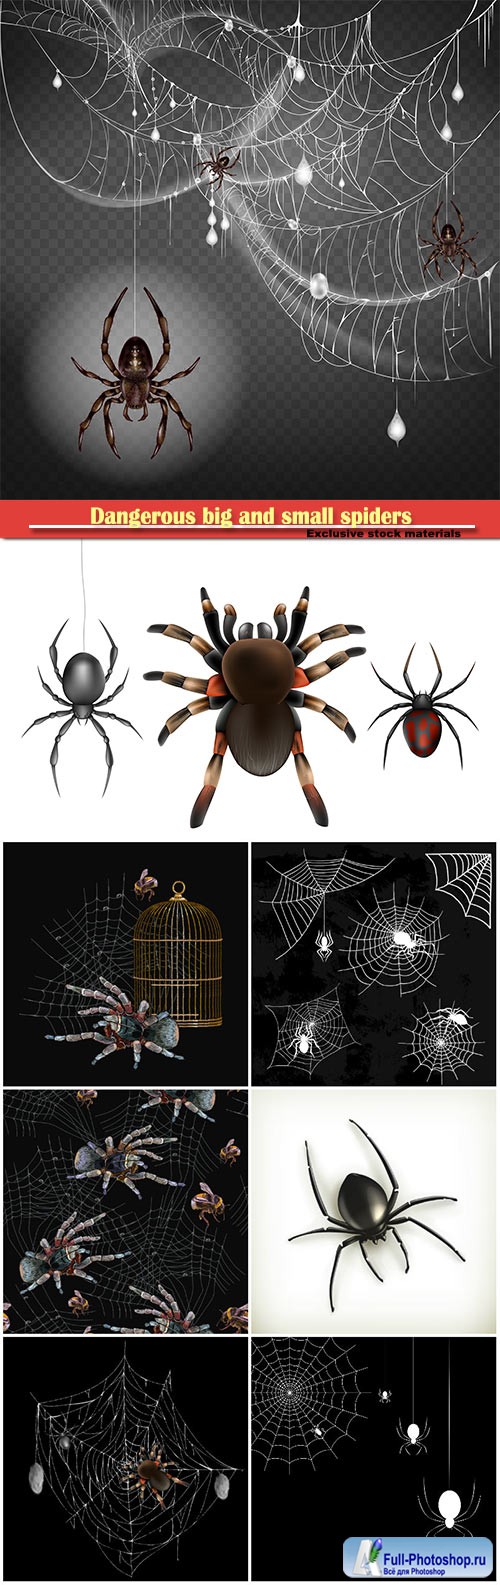 Dangerous, poisonous big and small spiders hanging on thin web string in 3d realistic vector illustration